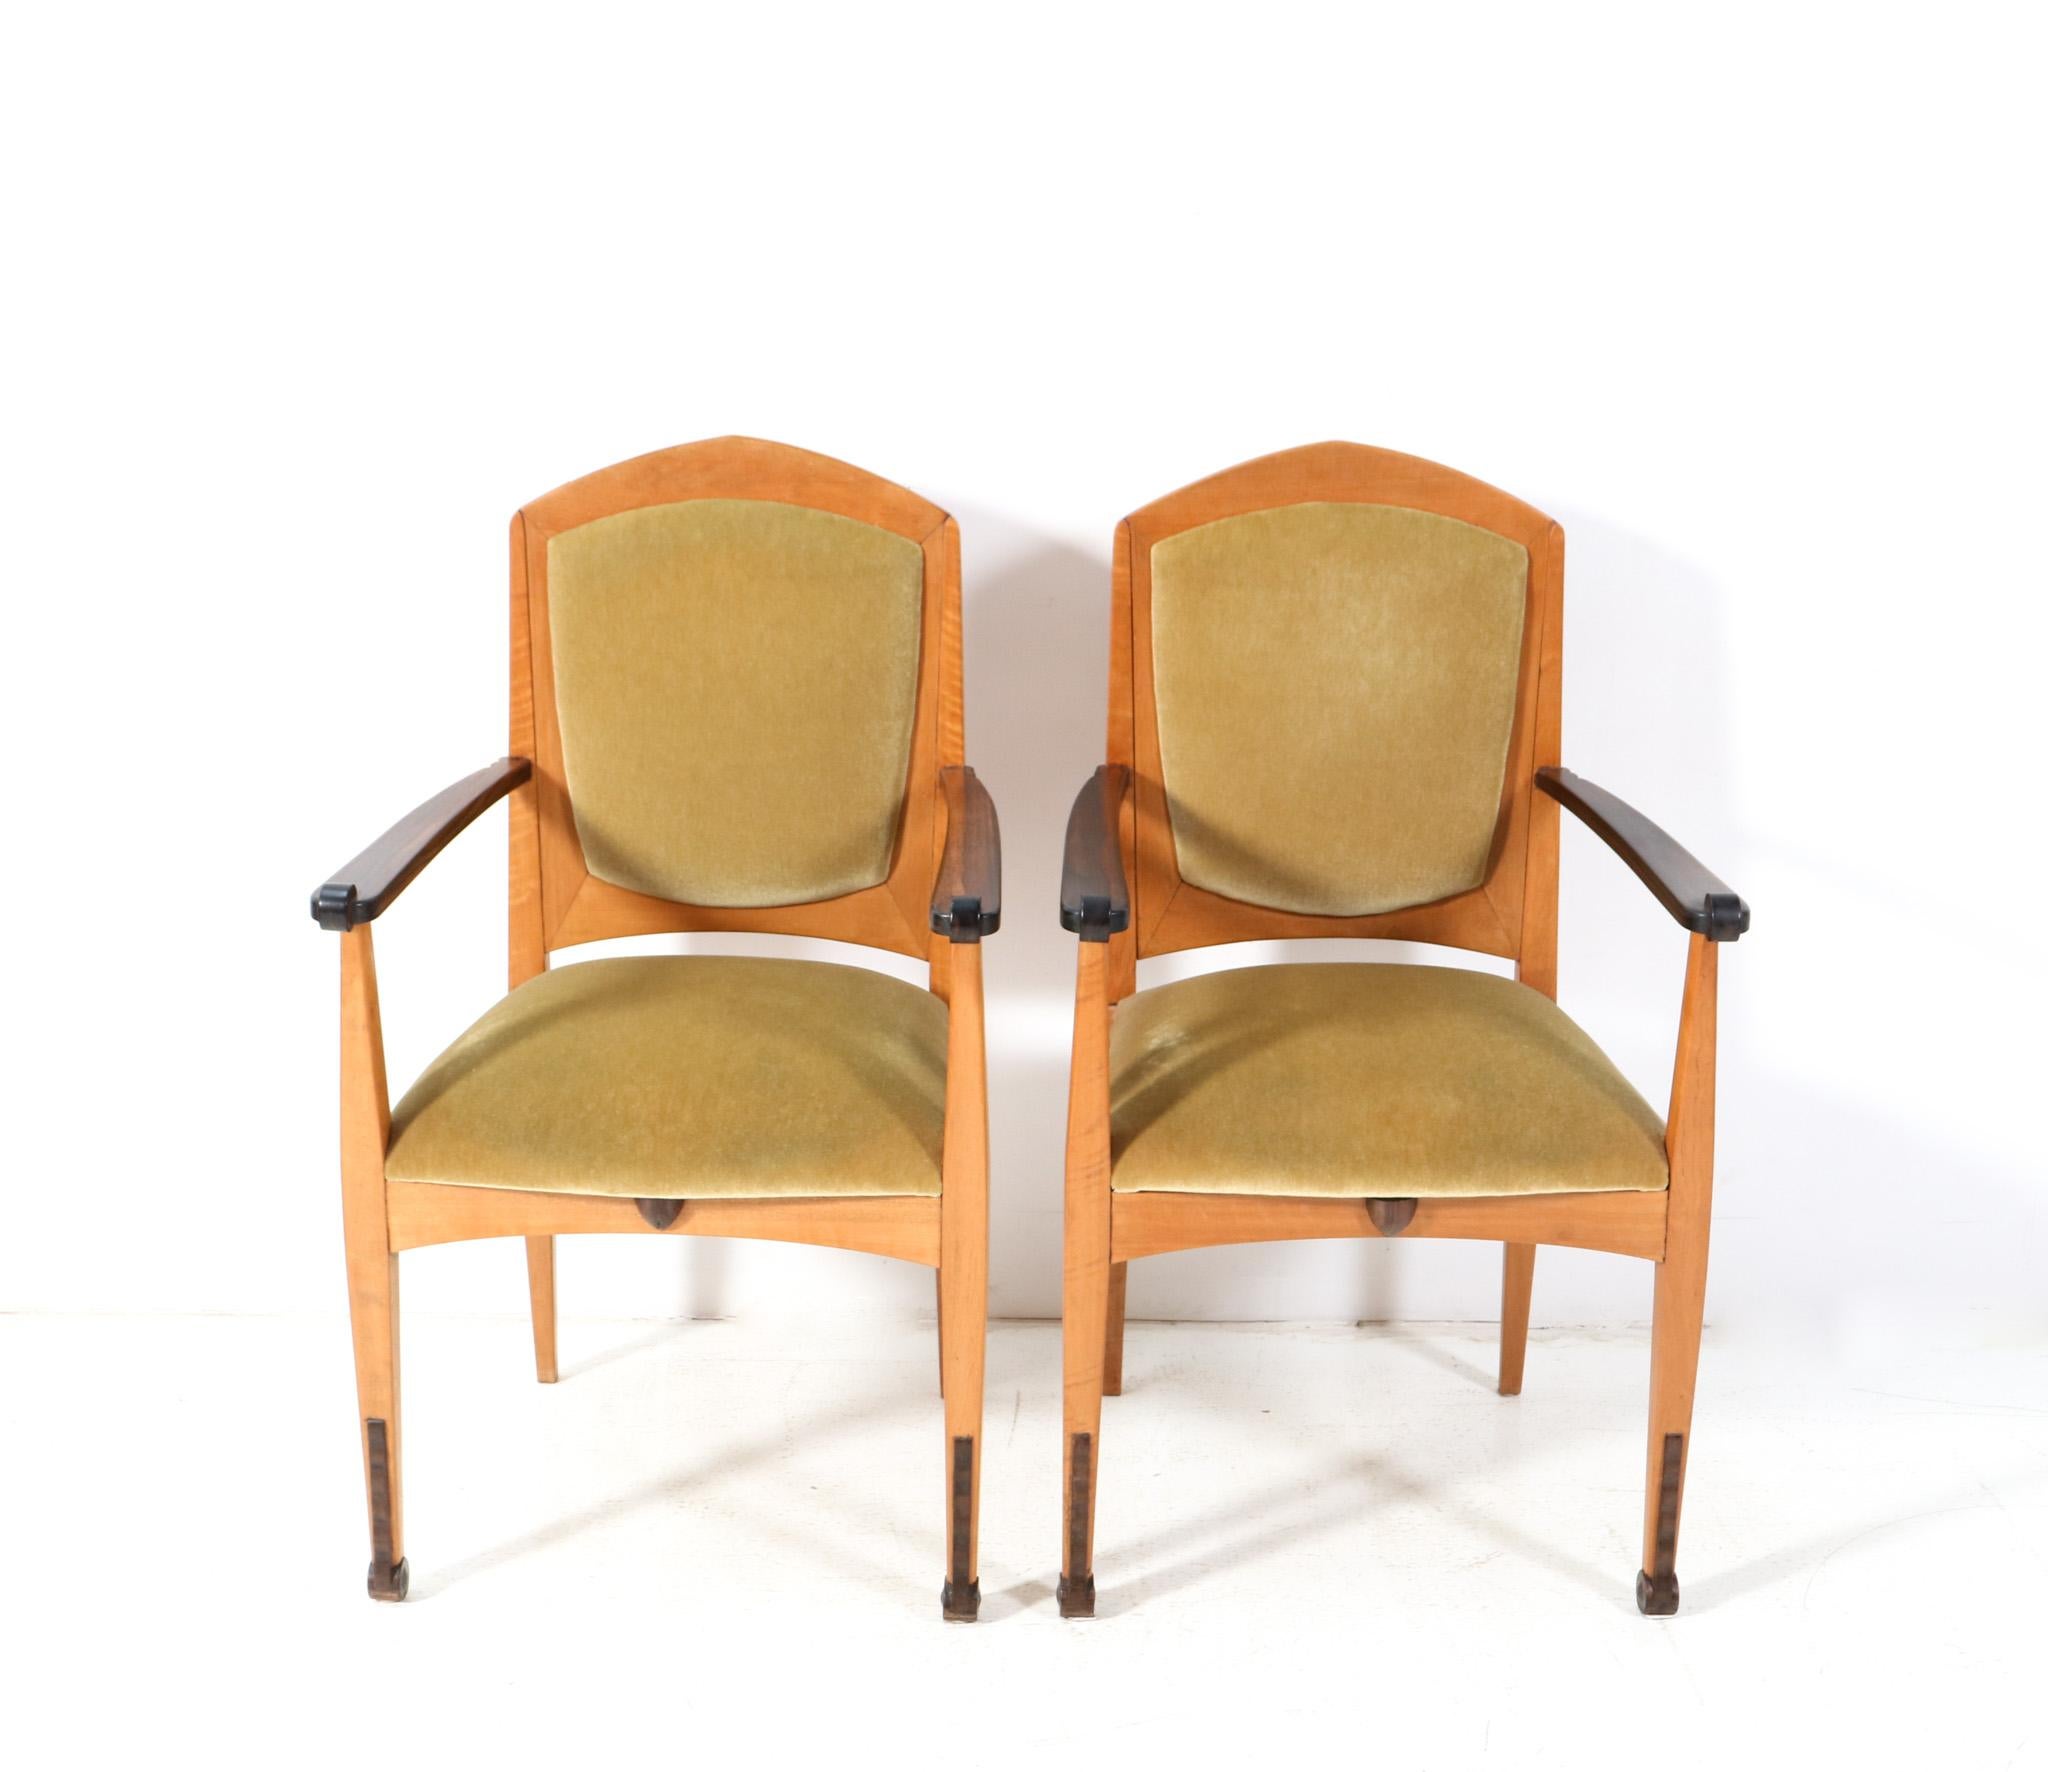 Magnificent and rare set of six Art Deco Amsterdamse School dining room chairs.
Design by J.J. Zijfers Amsterdam.
Striking Dutch design from the 1920s.
Solid walnut frames with solid macassar elements.
Re-upholstered by the former owners with green